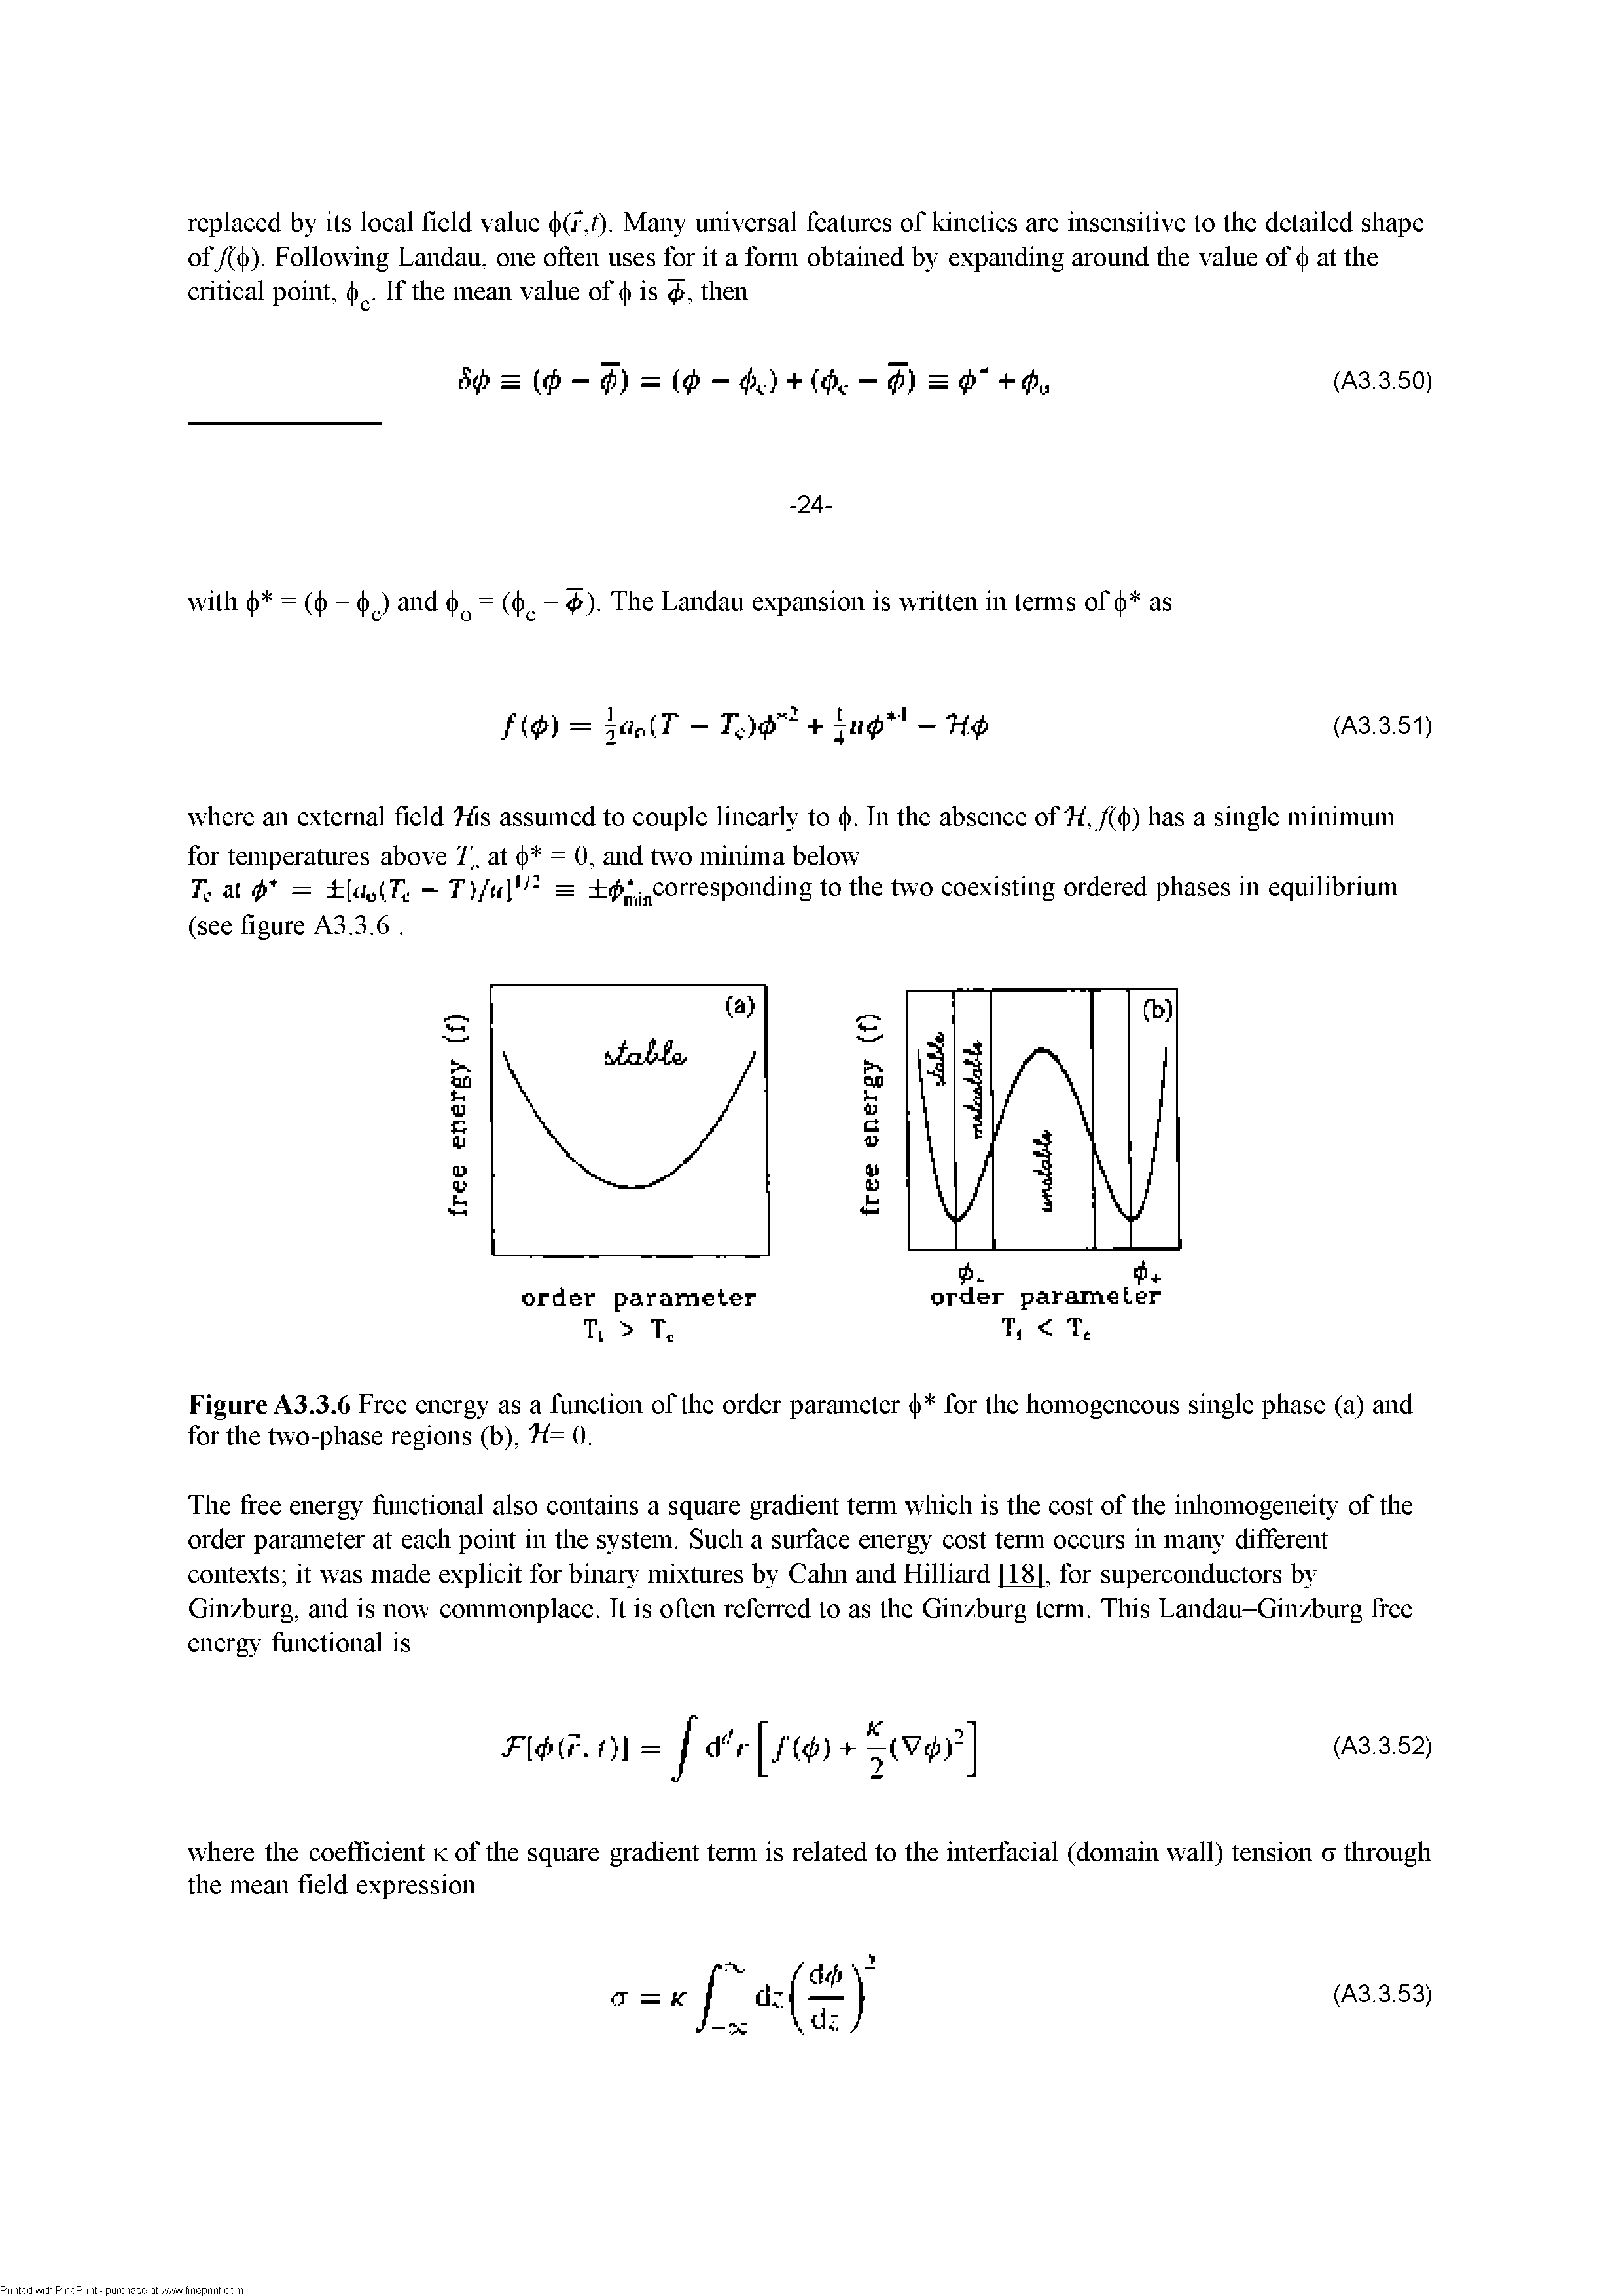 Figure A3.3.6 Free energy as a function of the order parameter cji for the homogeneous single phase (a) and for the two-phase regions (b), 0.